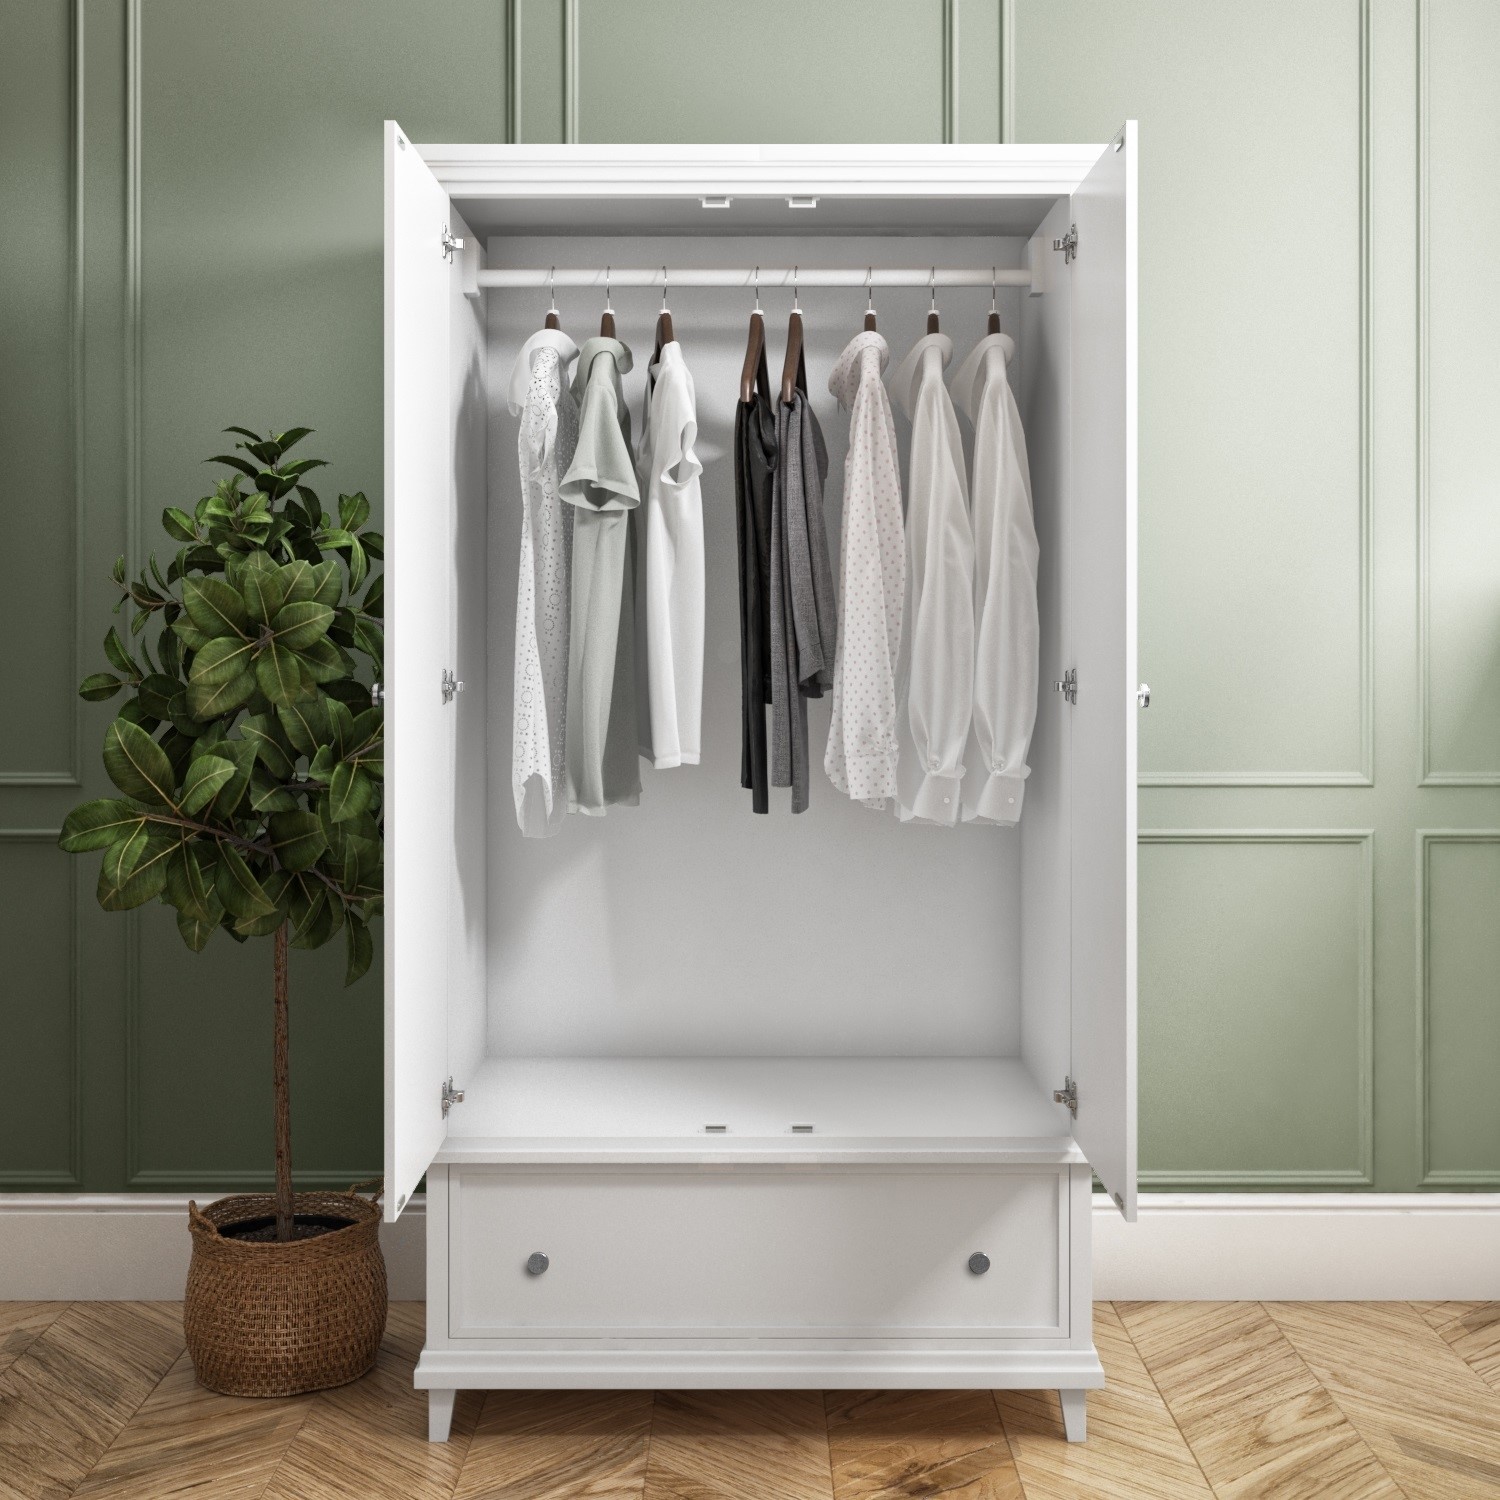 Read more about White double wardrobe with drawer georgia